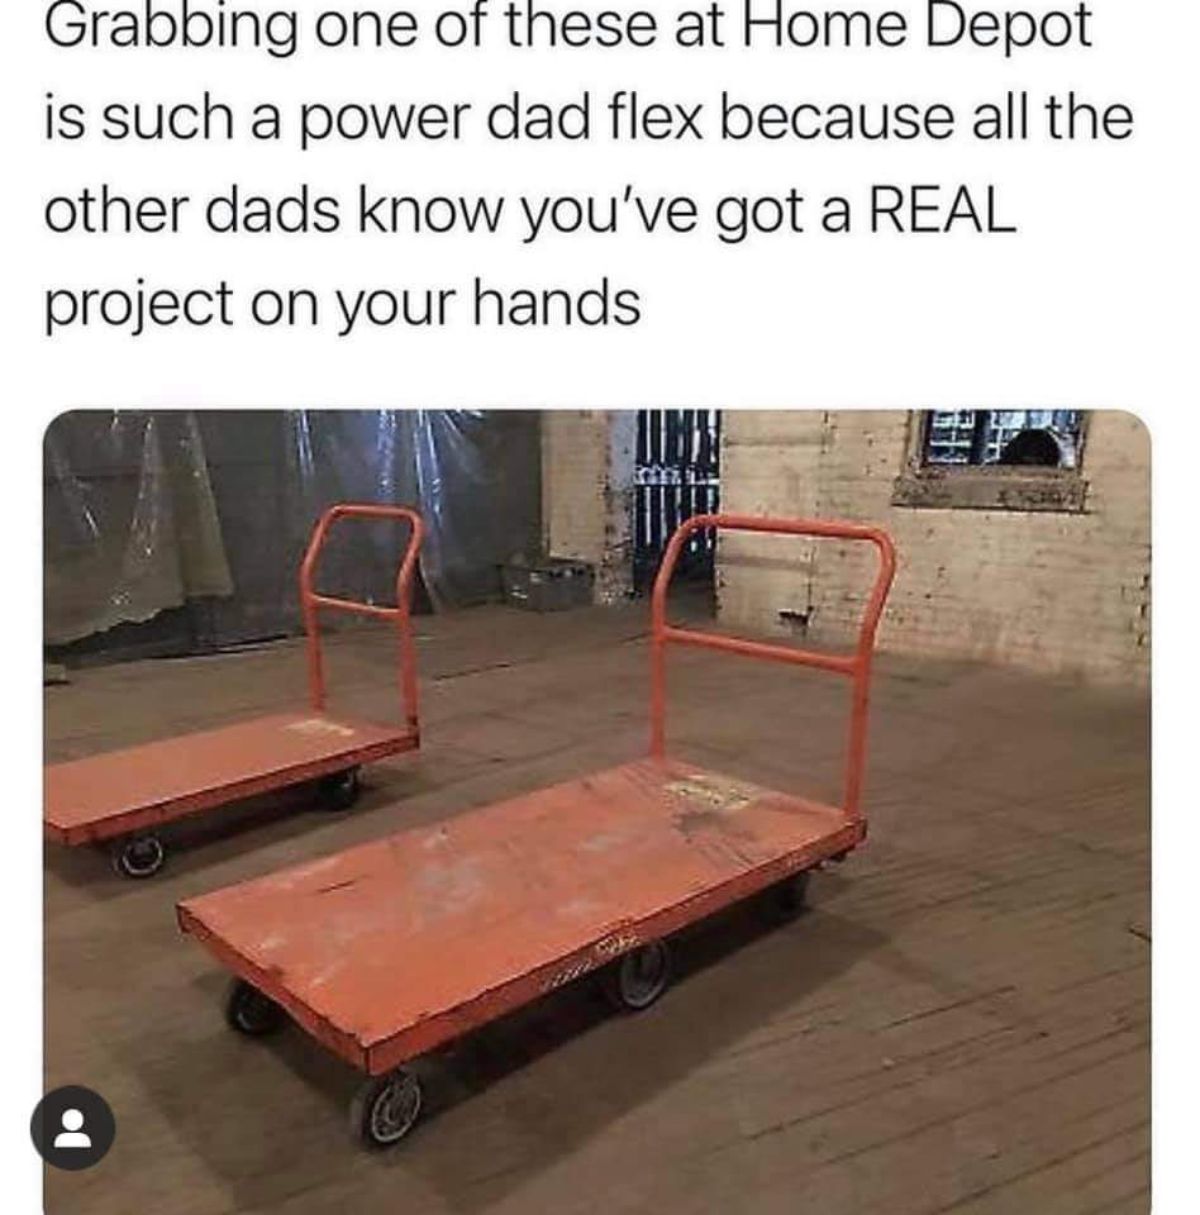 home depot dad flex meme - Grabbing one of these at Home Depot is such a power dad flex because all the other dads know you've got a Real project on your hands